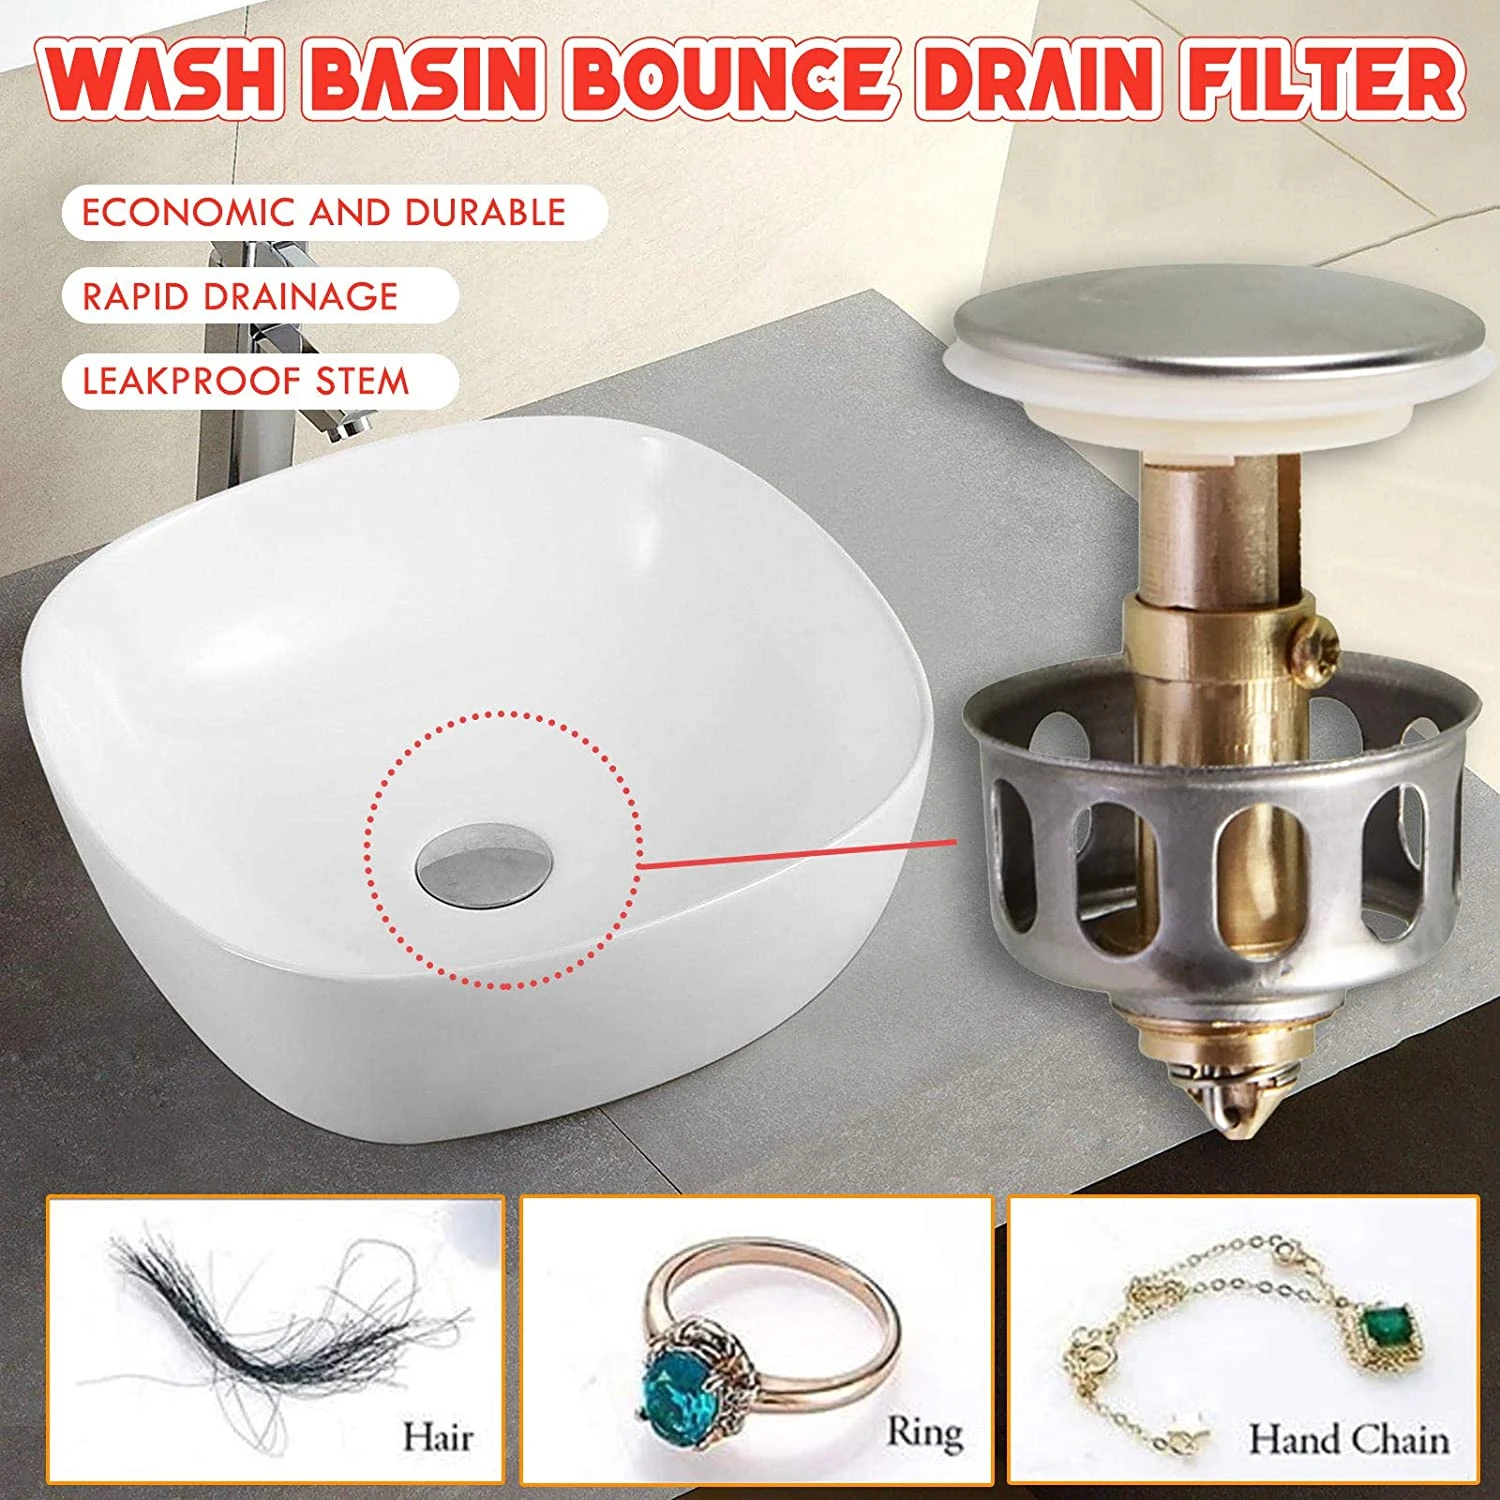 Universal Home Kitchen Wash Strainer Basin Bounce Sink Drain Filter Pop Up Bathroom Stopper Plug With Basket Filter Drains Aliexpress